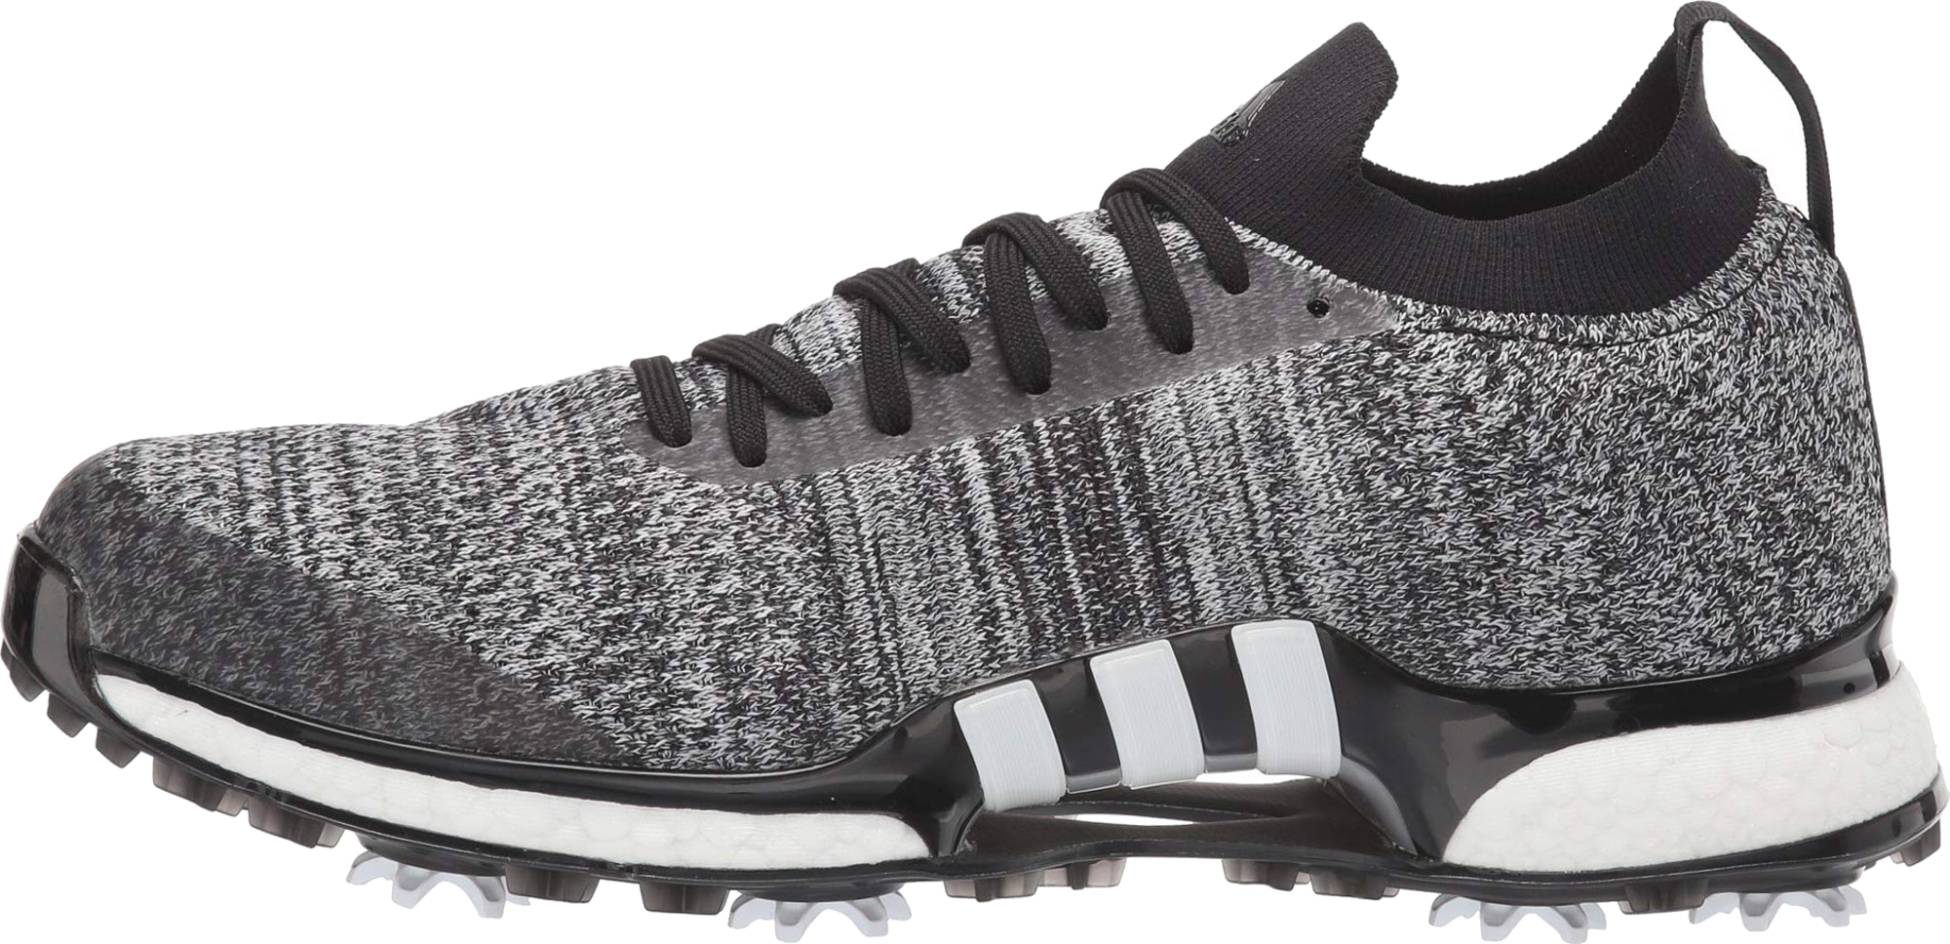 Magnetic Slightly Africa Adidas Tour360 XT Primeknit Review 2022, Facts, Deals ($111) | RunRepeat